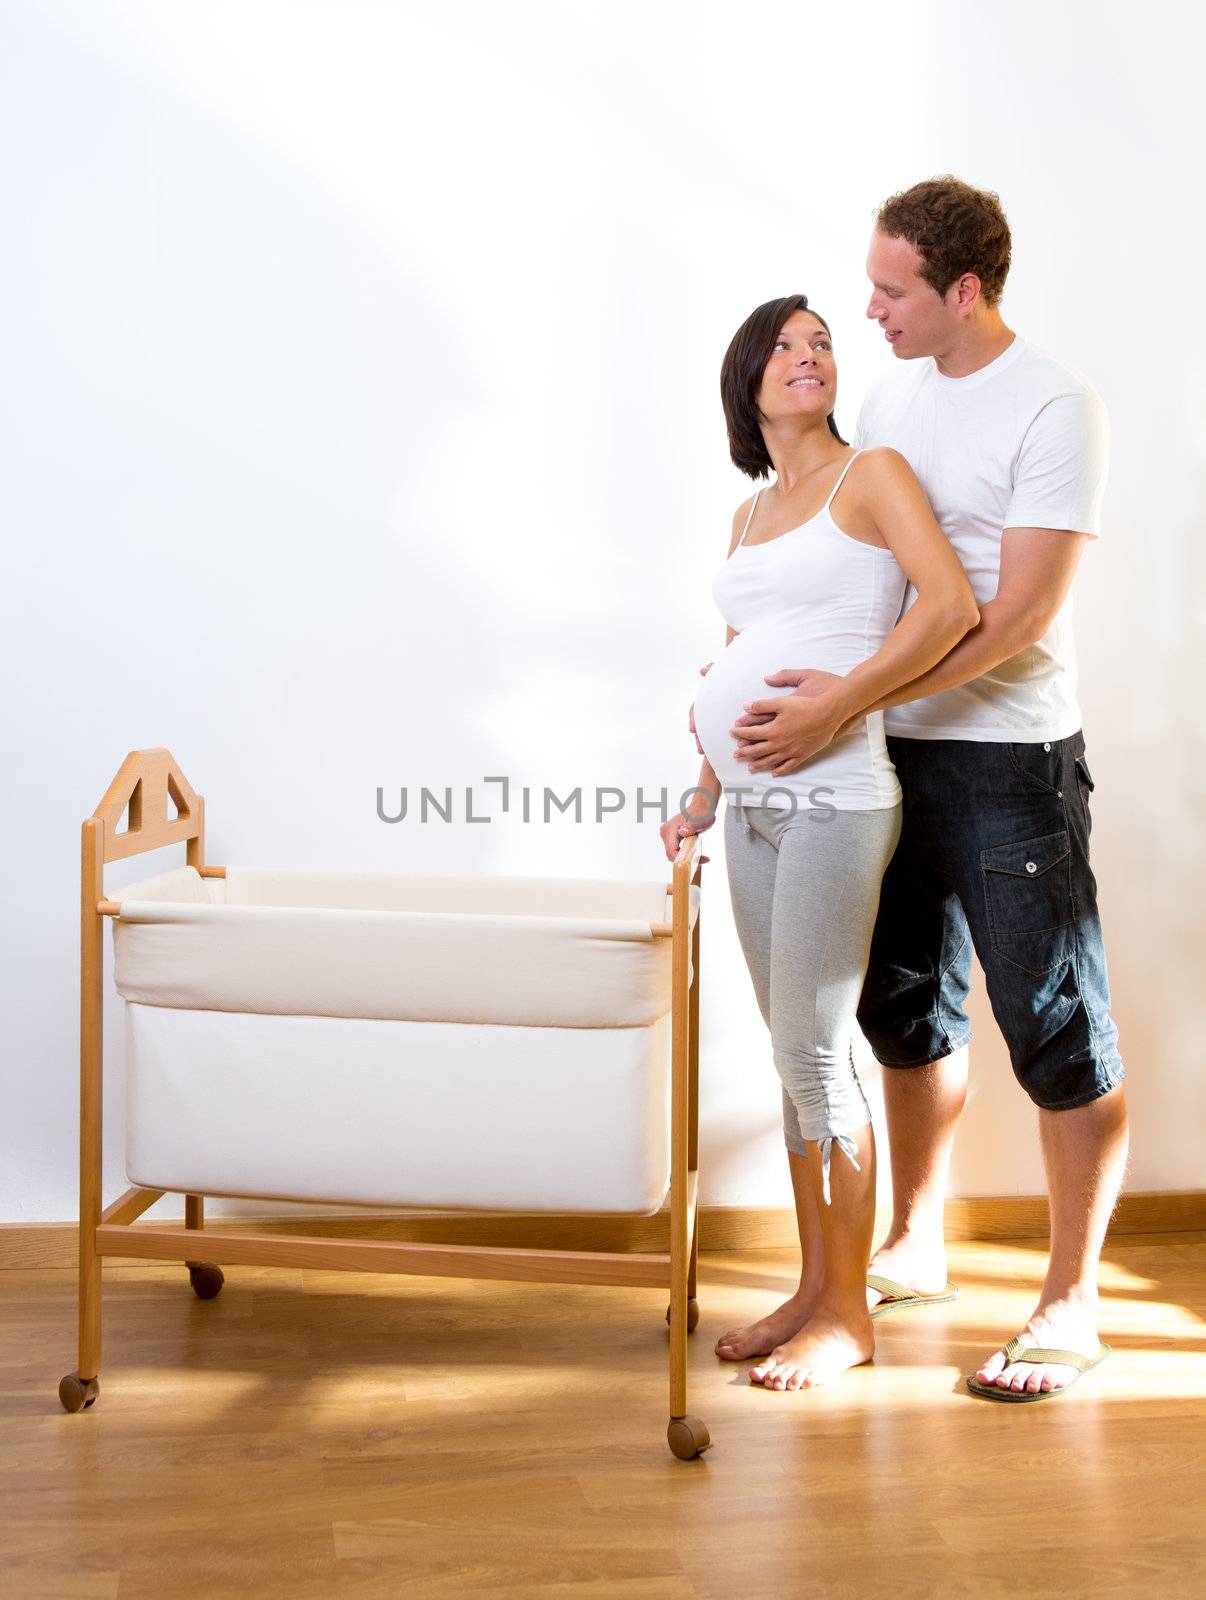 Couple with pregnant woman hug with baby cradle at home